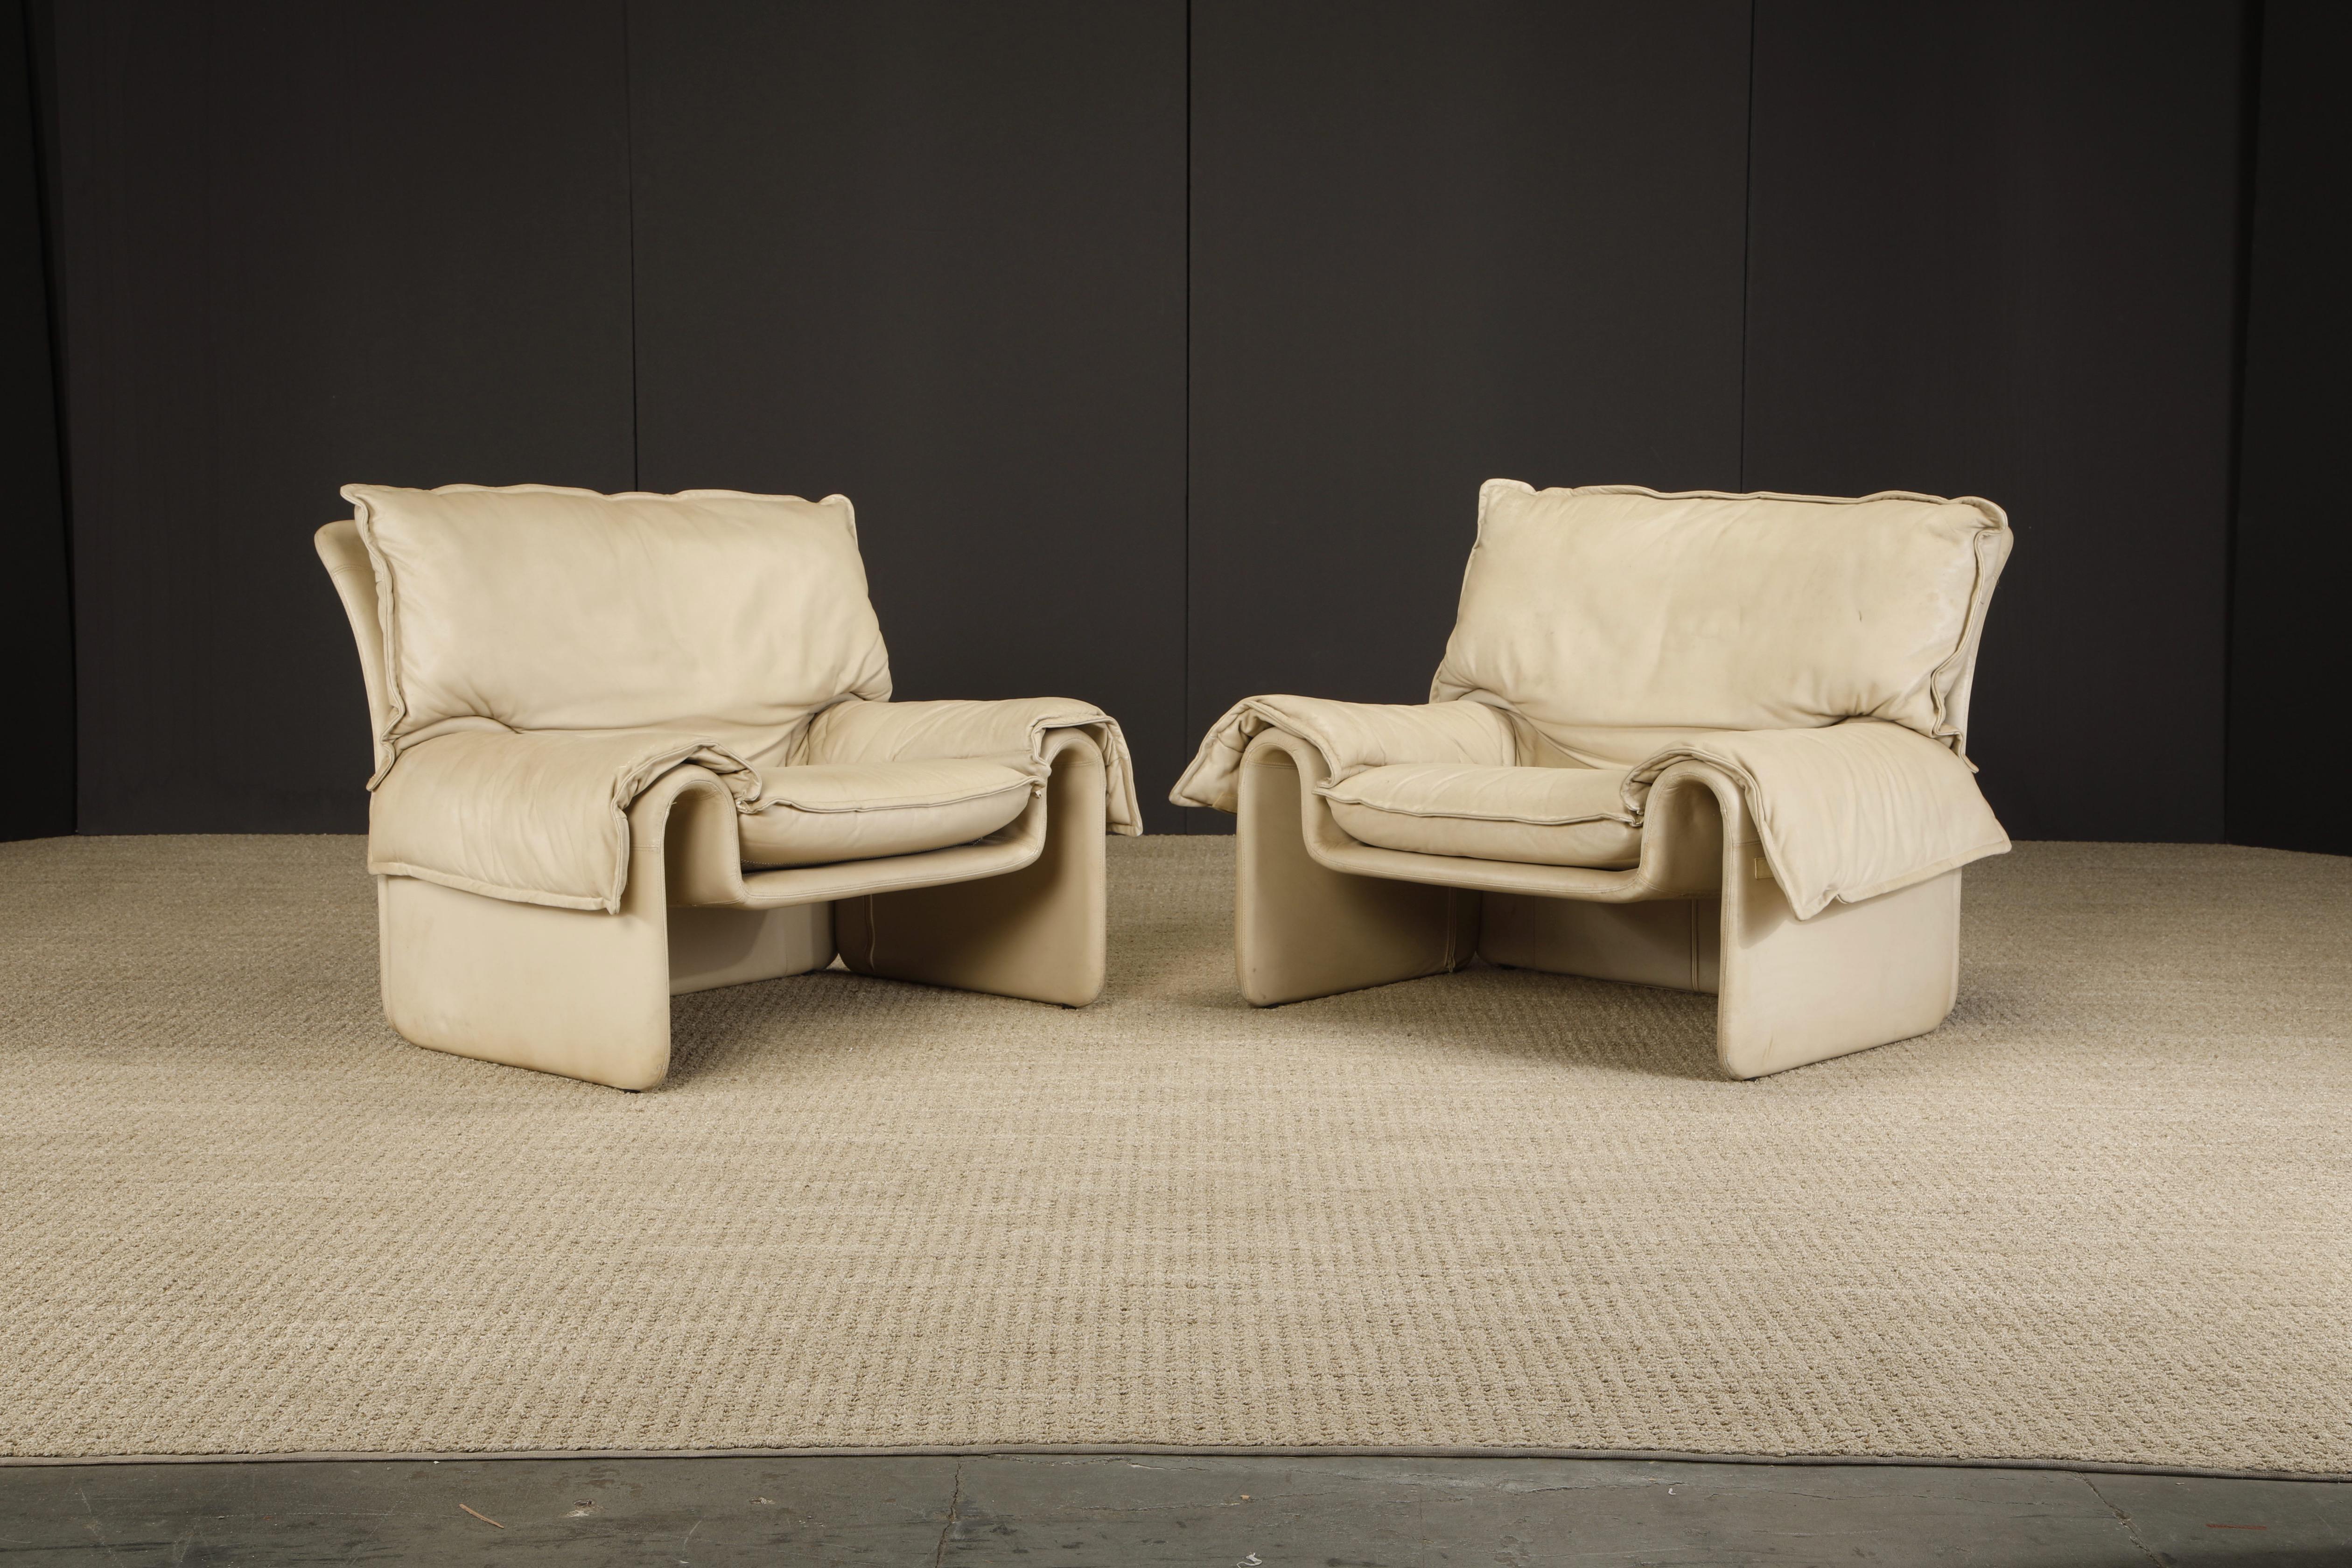 A beautiful off-white leather pair of lounge chairs by illustrious architect and designer Guido Faleschini for i4 Mariani, Italy. Designed in the 1970s, this pair of soft, comfy, leather lounge chairs are signed with Mariani's repeat fabric